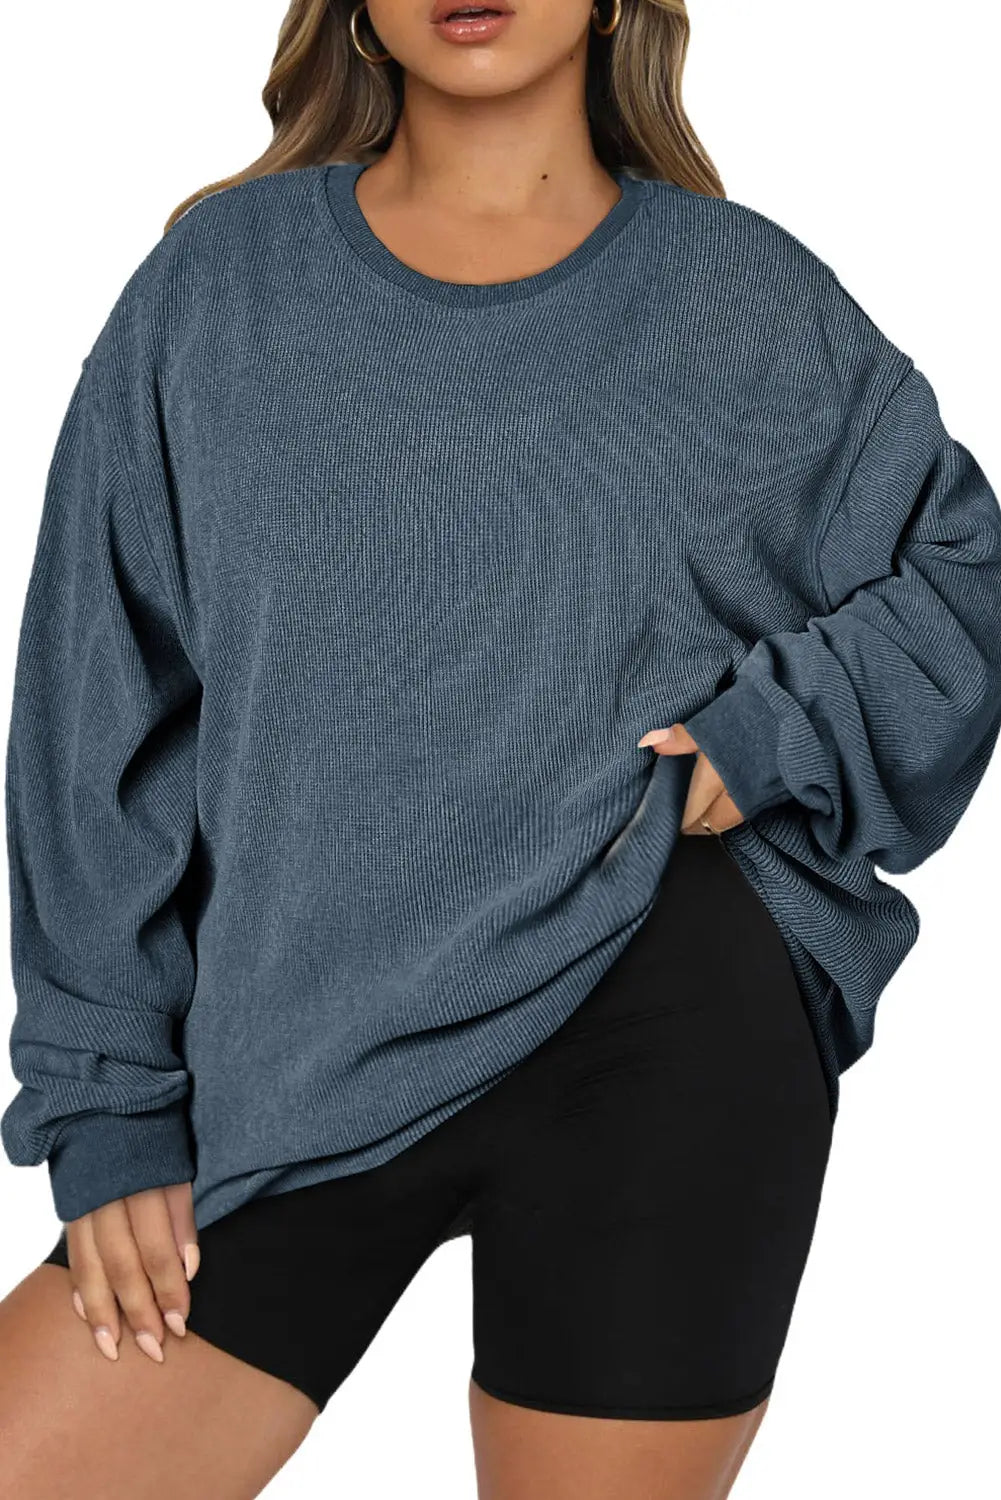 Pink solid ribbed knit round neck pullover sweatshirt - tops